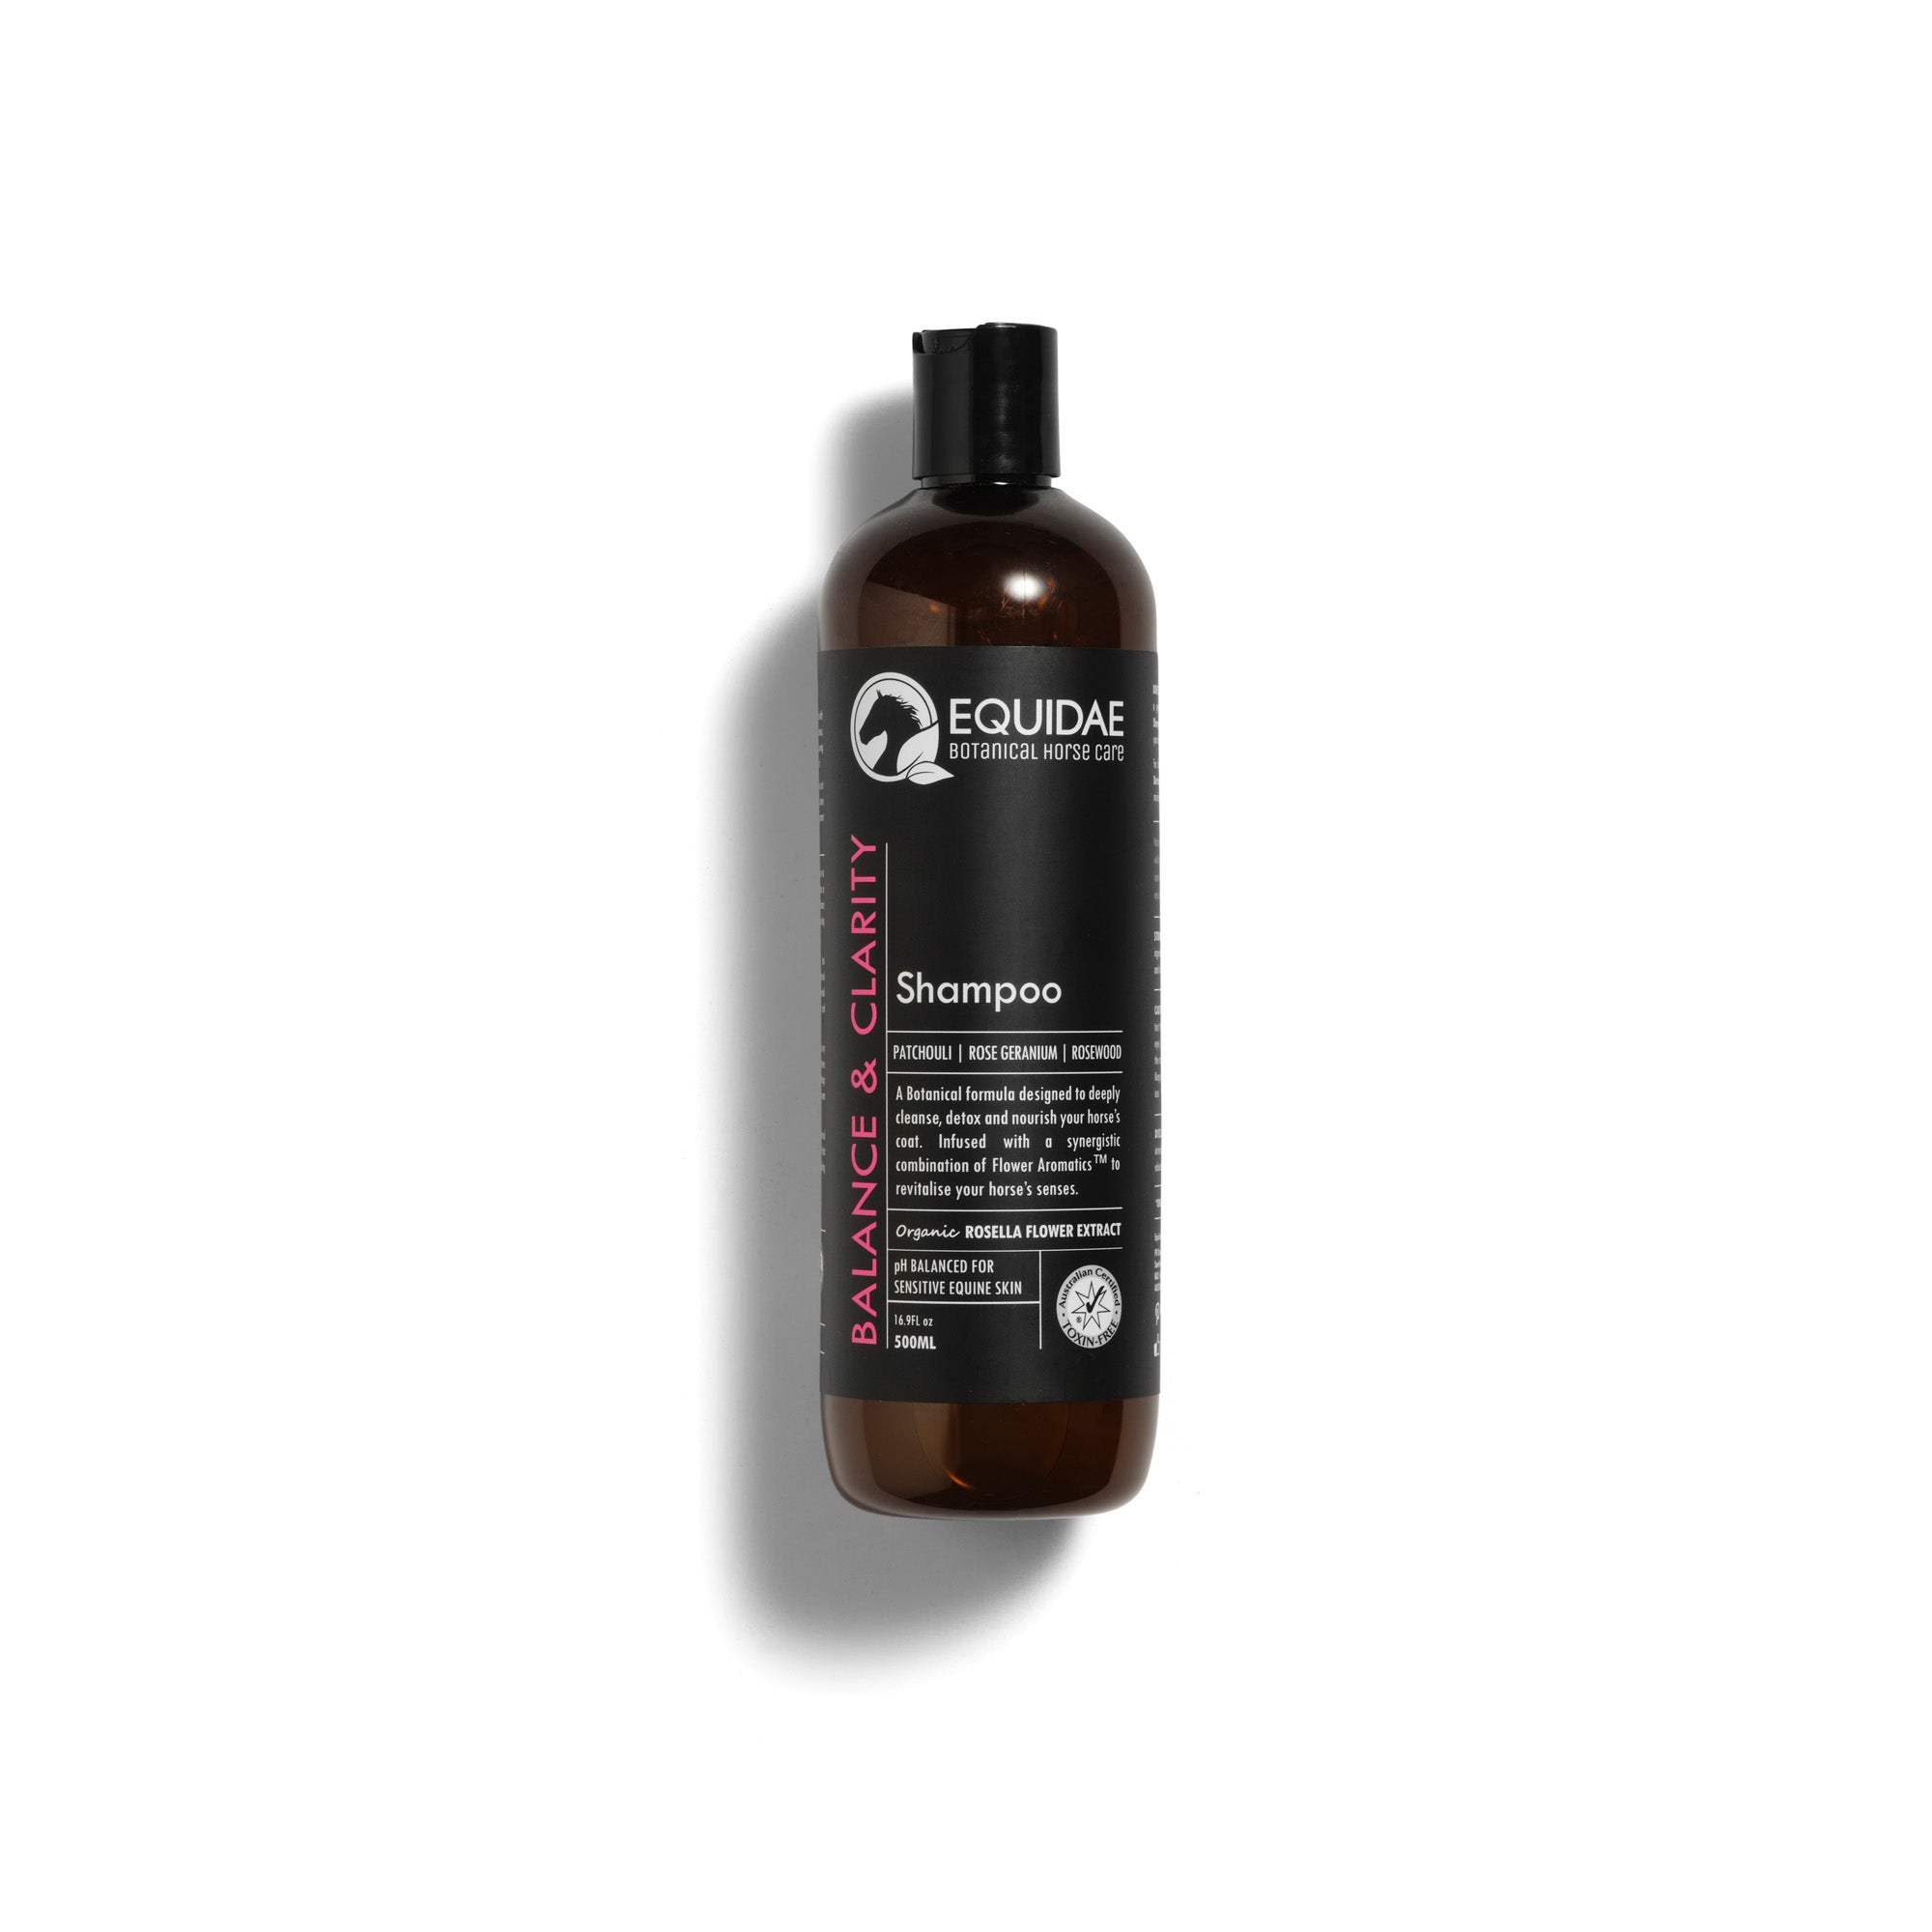 Natural horse shampoo for a shiny healthy coat. Made of natural ingredients, helps to keep mane, coat and tail healthy, untangled and easy to brush.